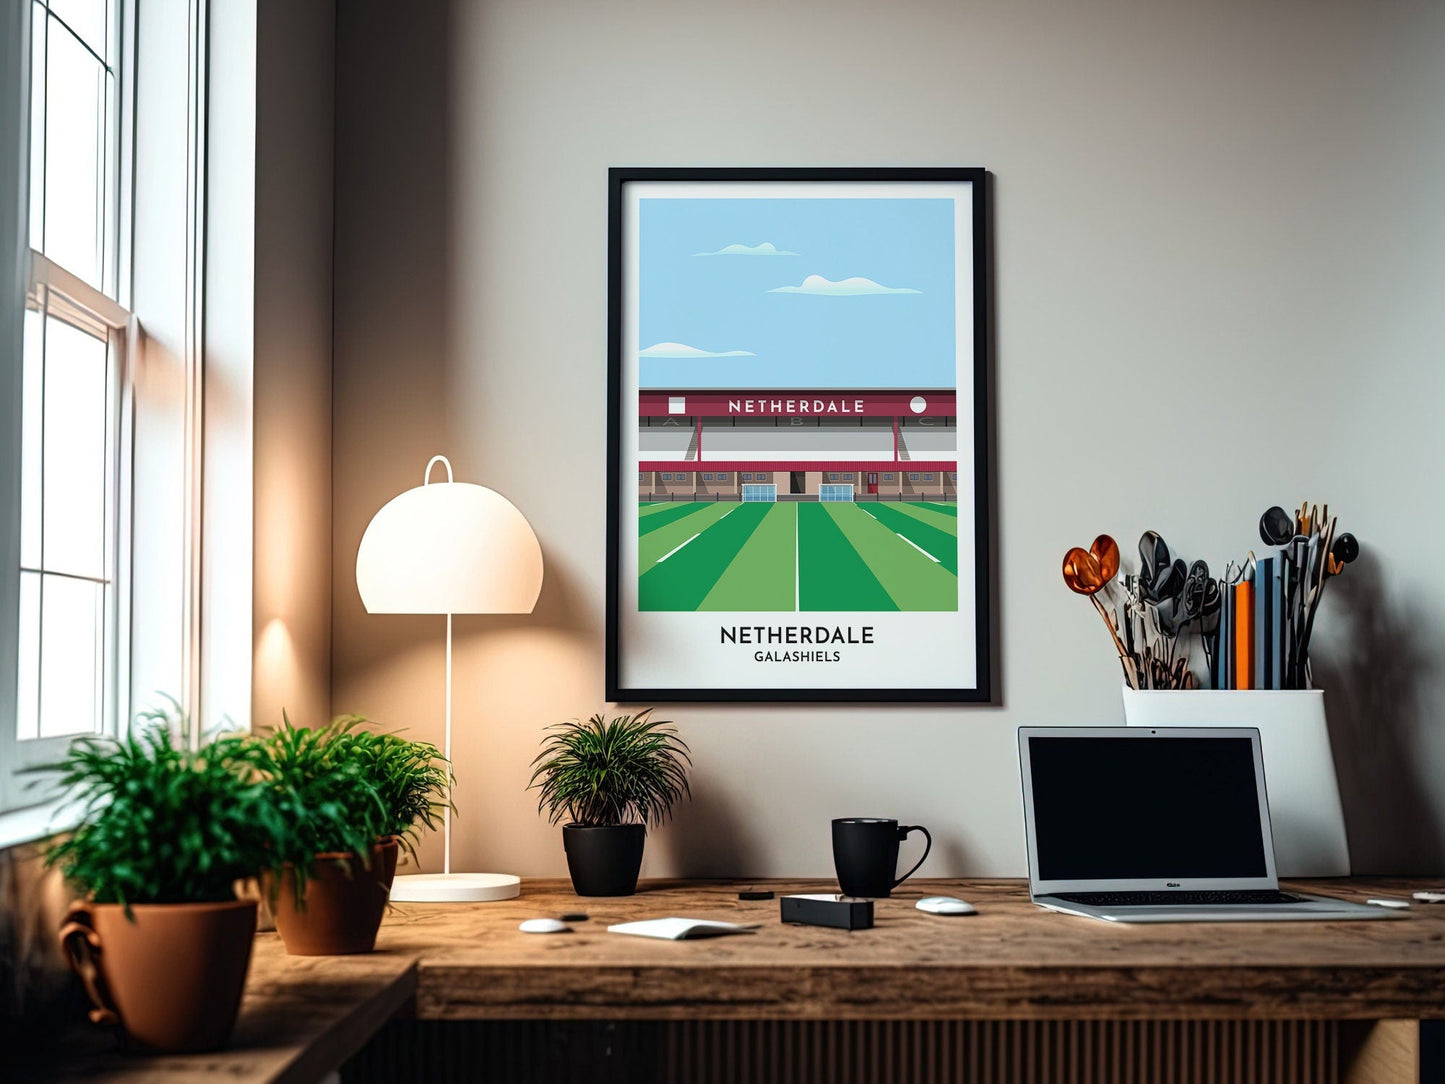 Gala Rugby Art Print - Netherdale Rugby Ground - Scottish Borders Gift - Framed Artwork - Rugby Poster - Gifts for Her Him - Turf Football Art